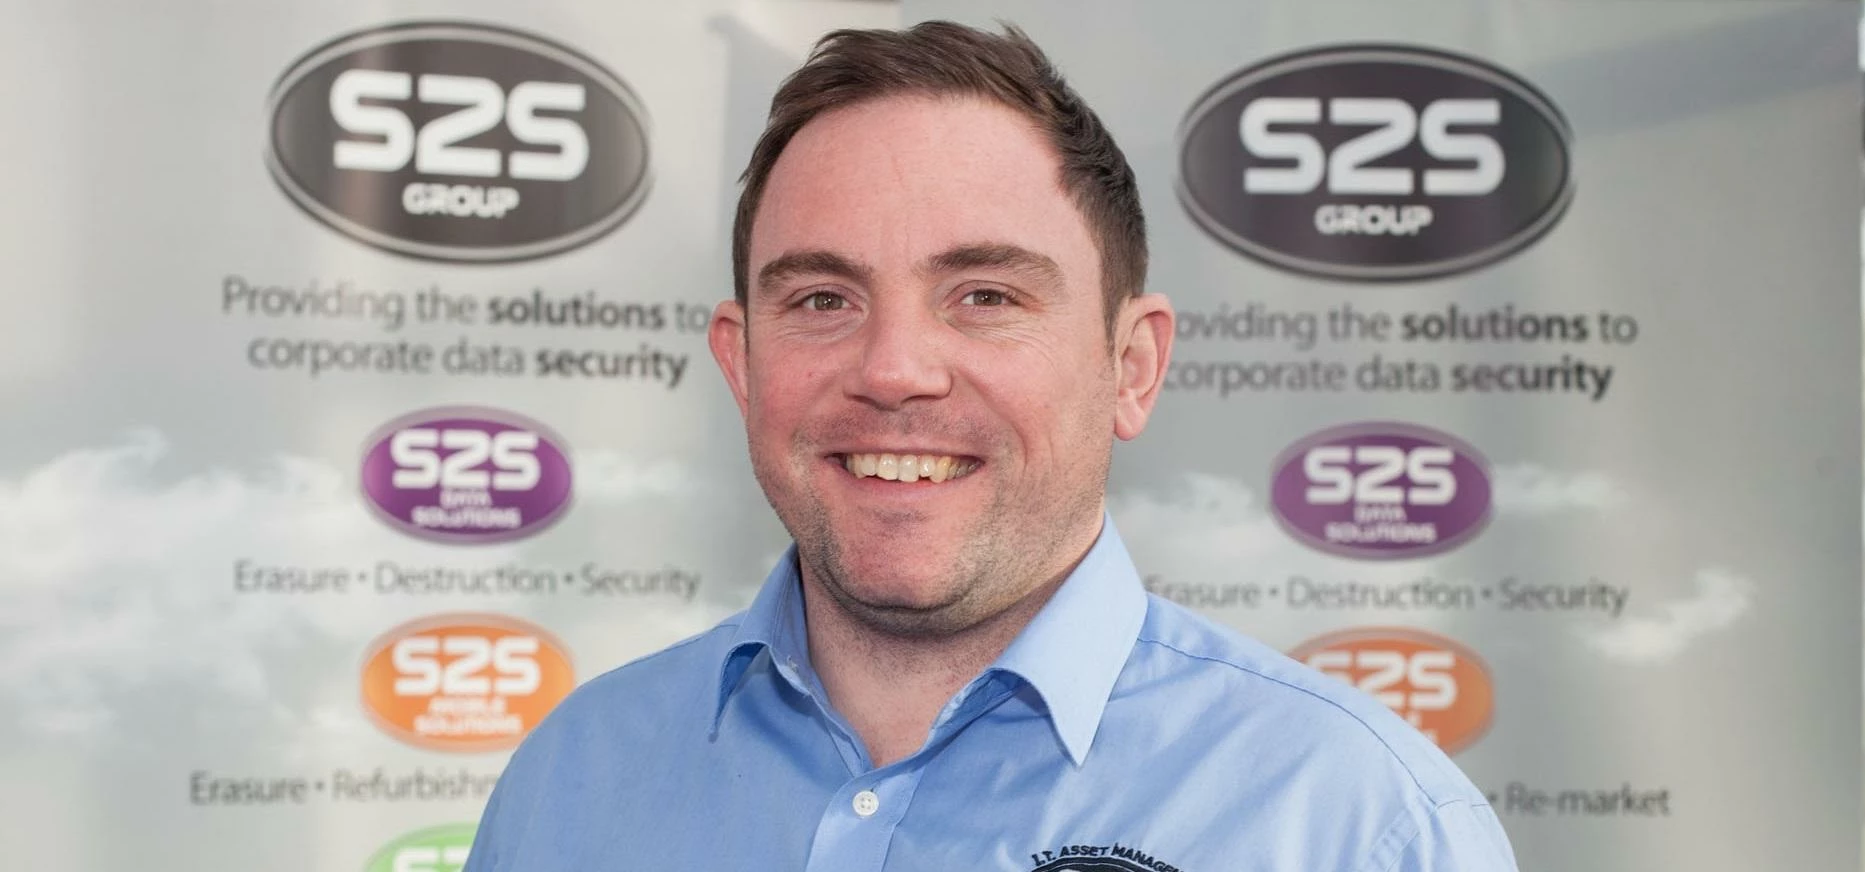 Grant Barton - Operations Director, S2S Group